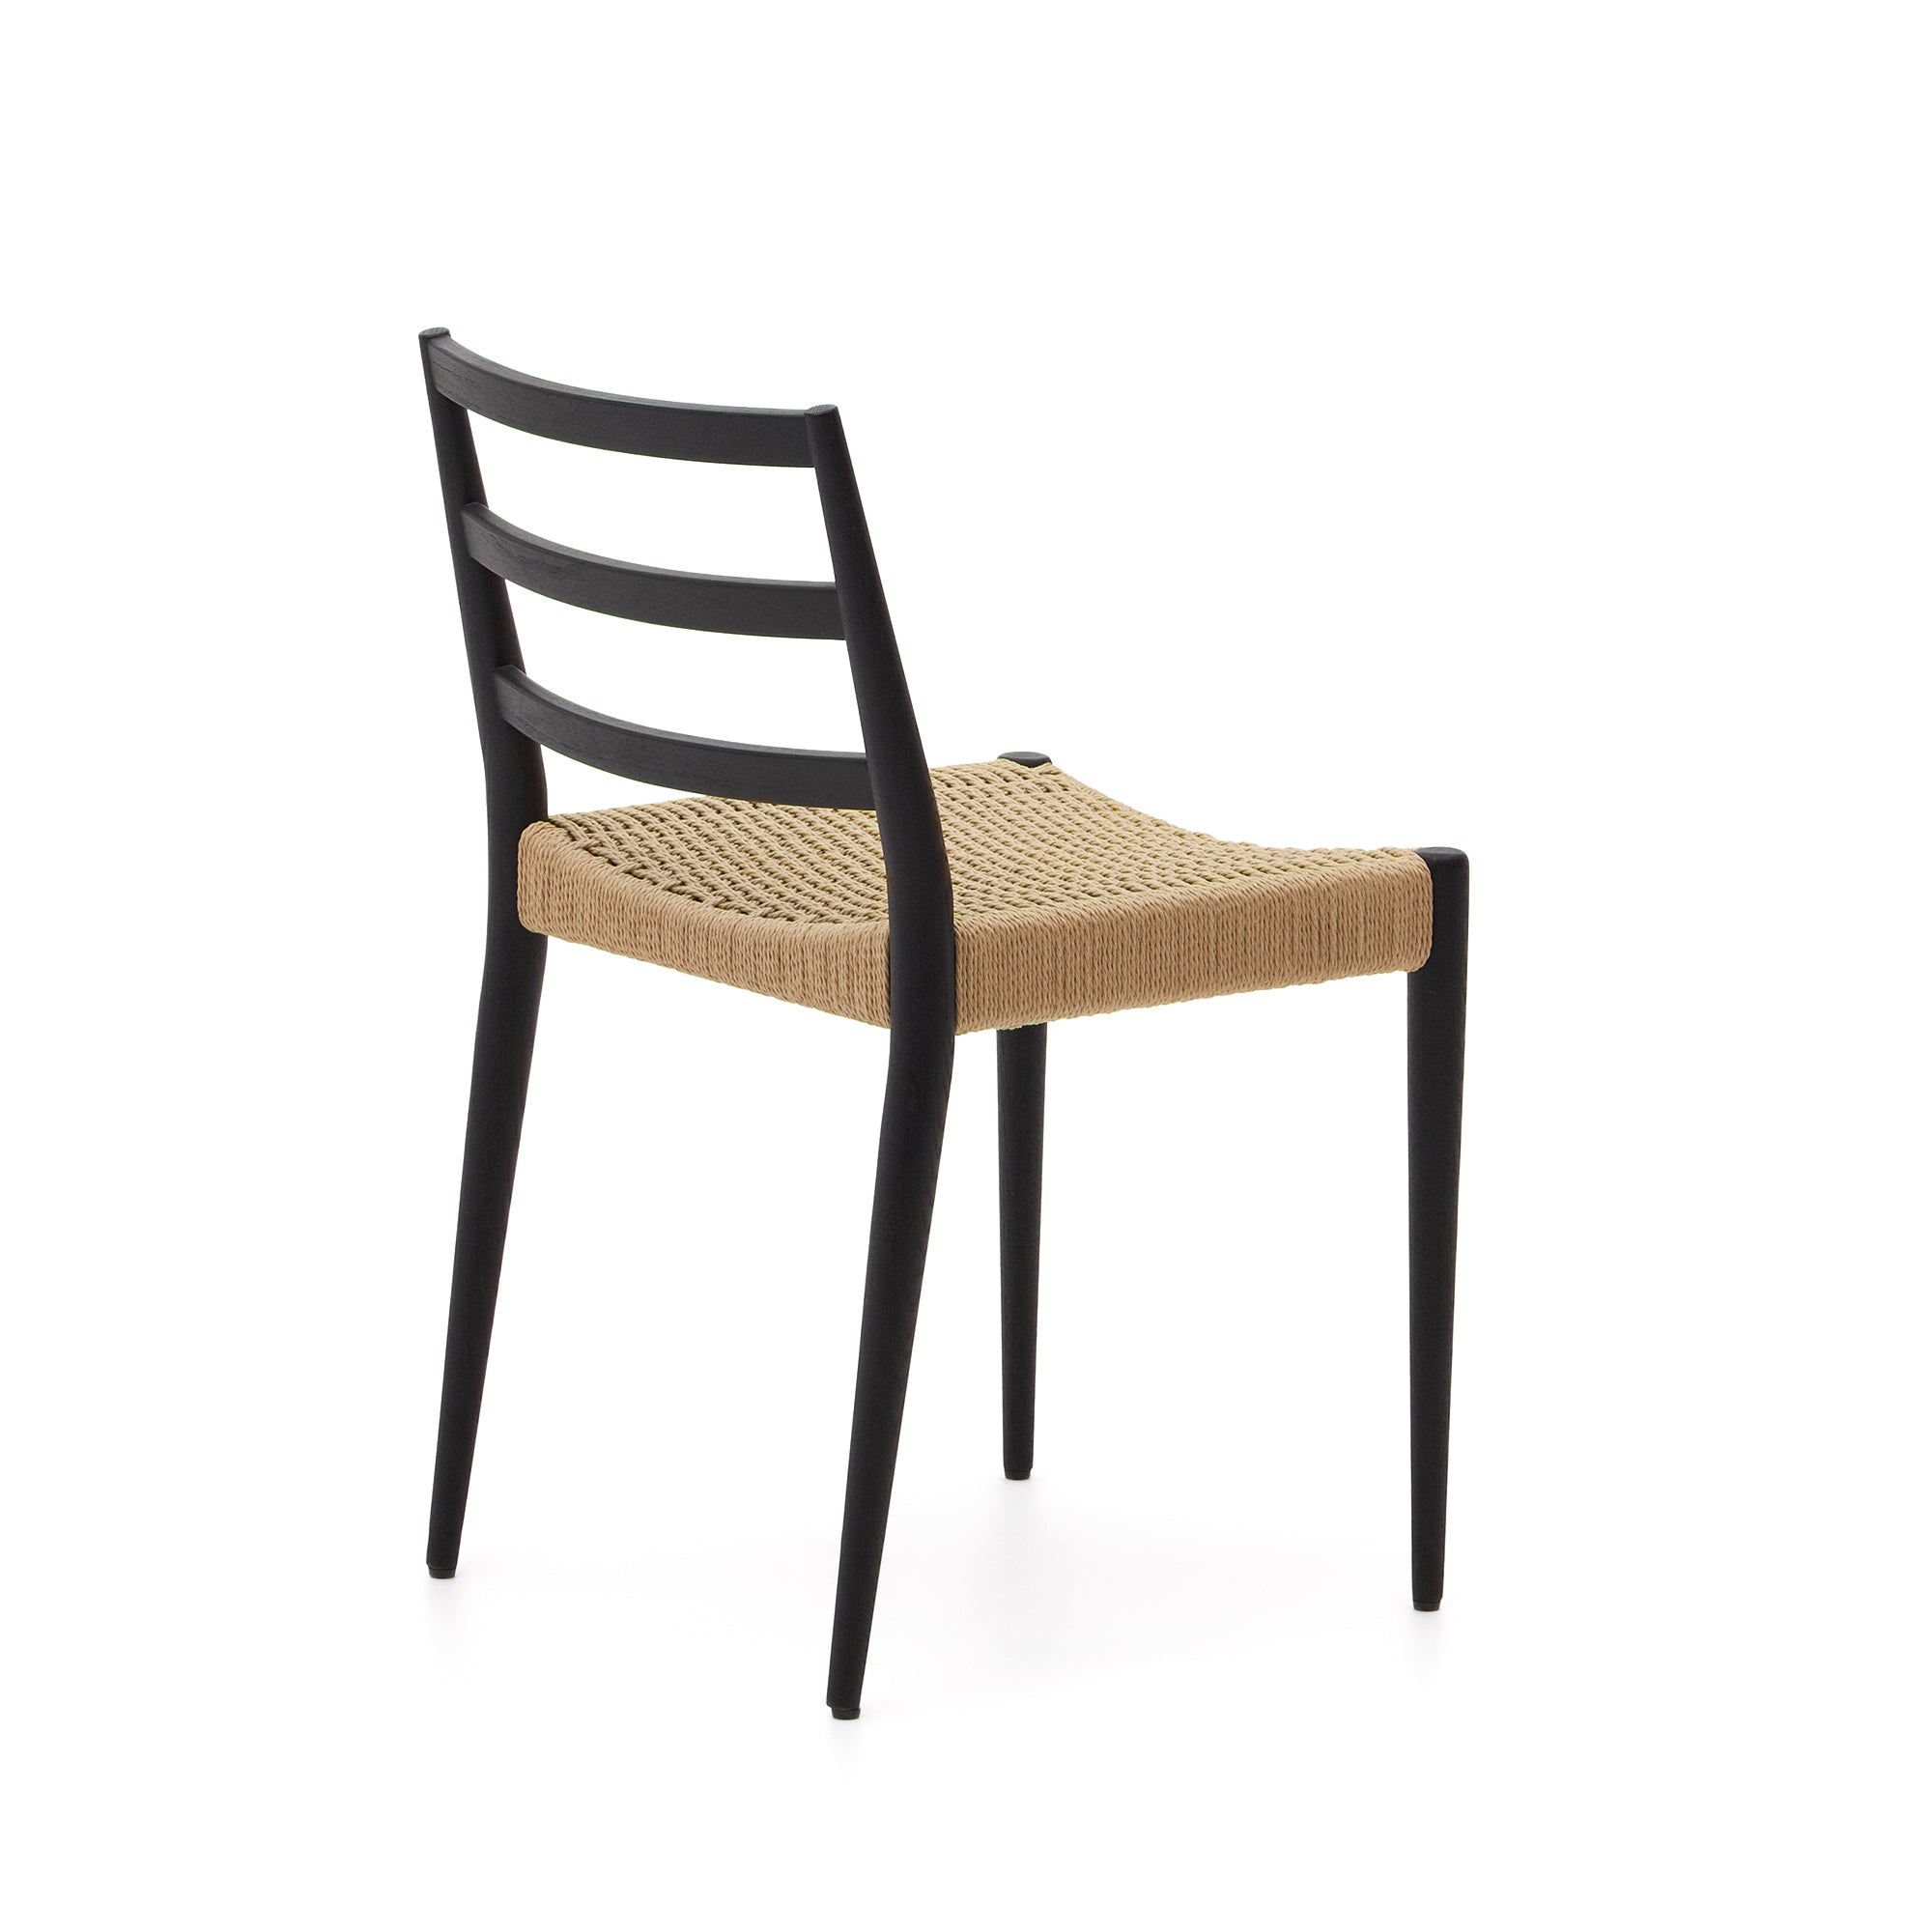 Analy chair in solid oak 100% FSC with black finish and rope seat